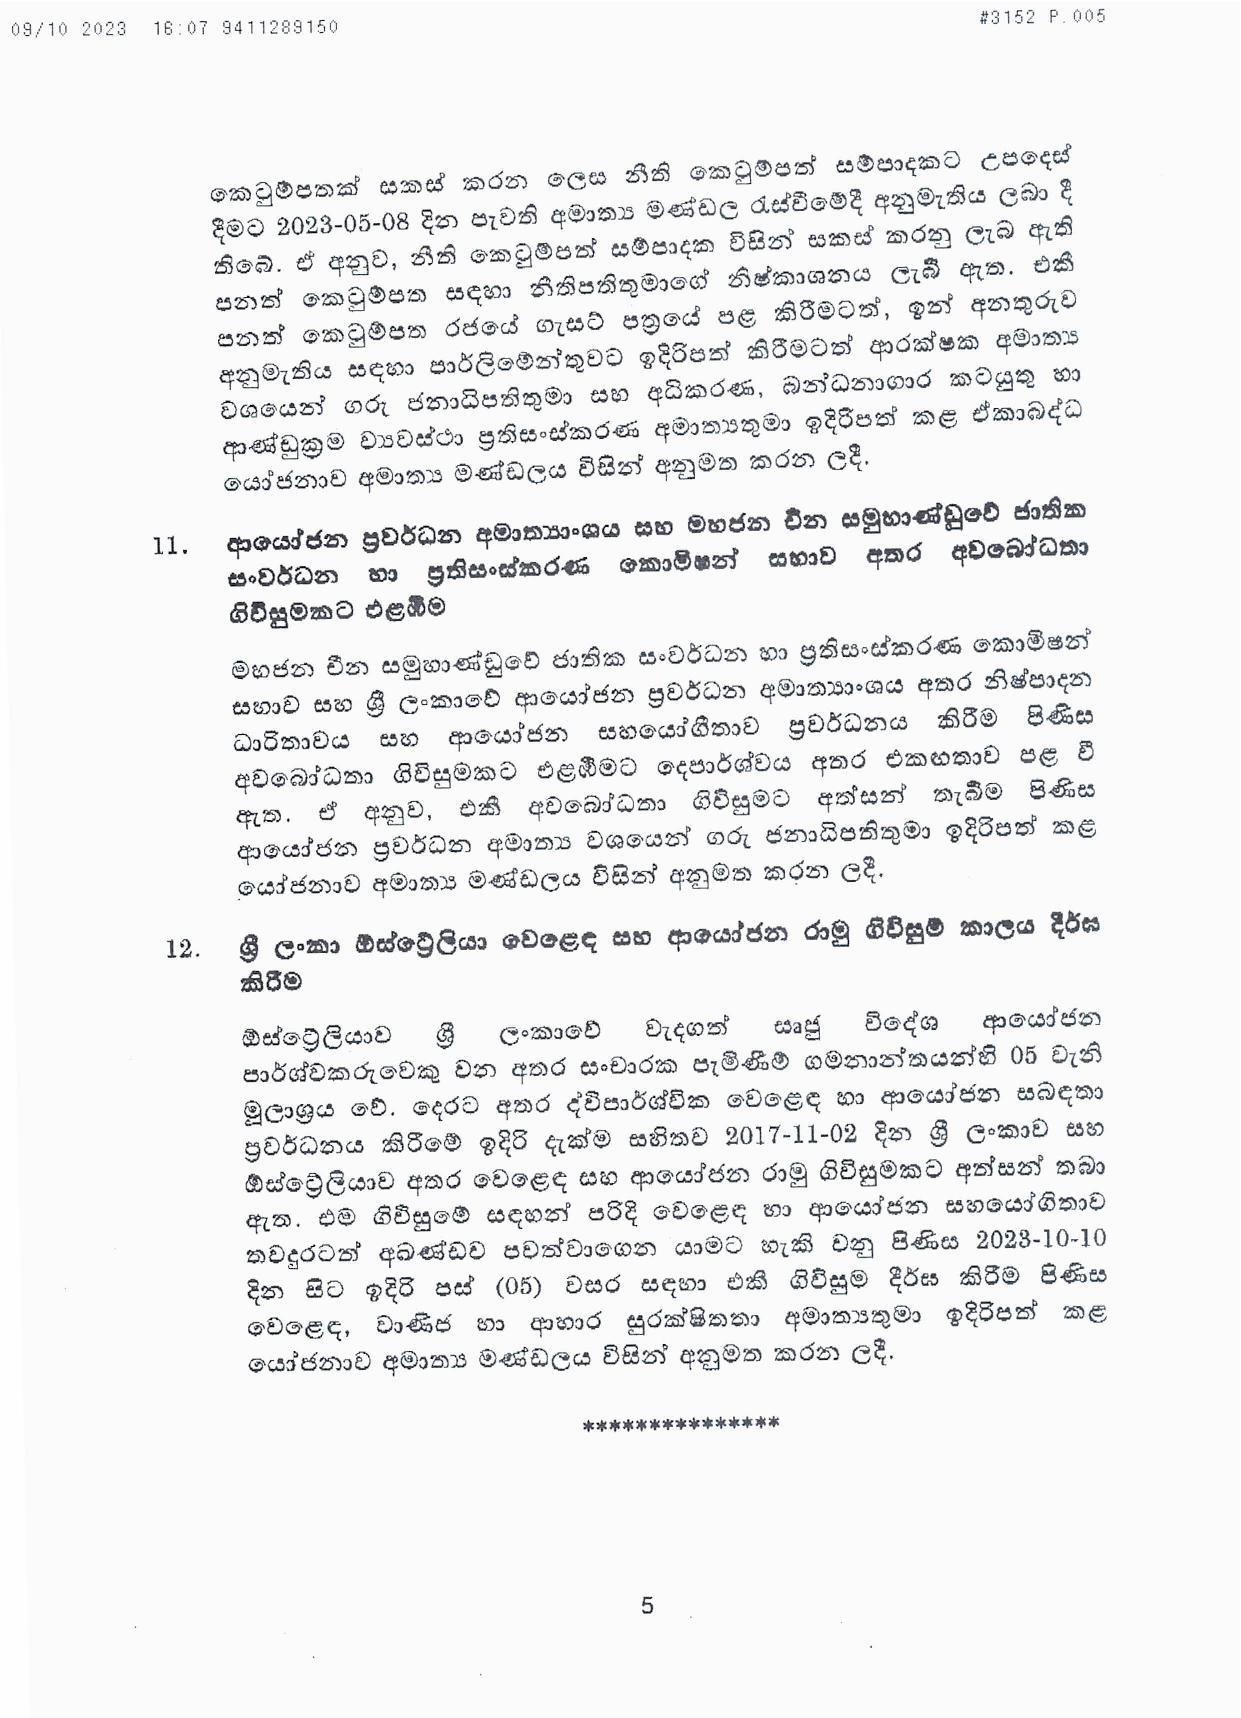 Cabinet Decision on 09.10.2023 page 005